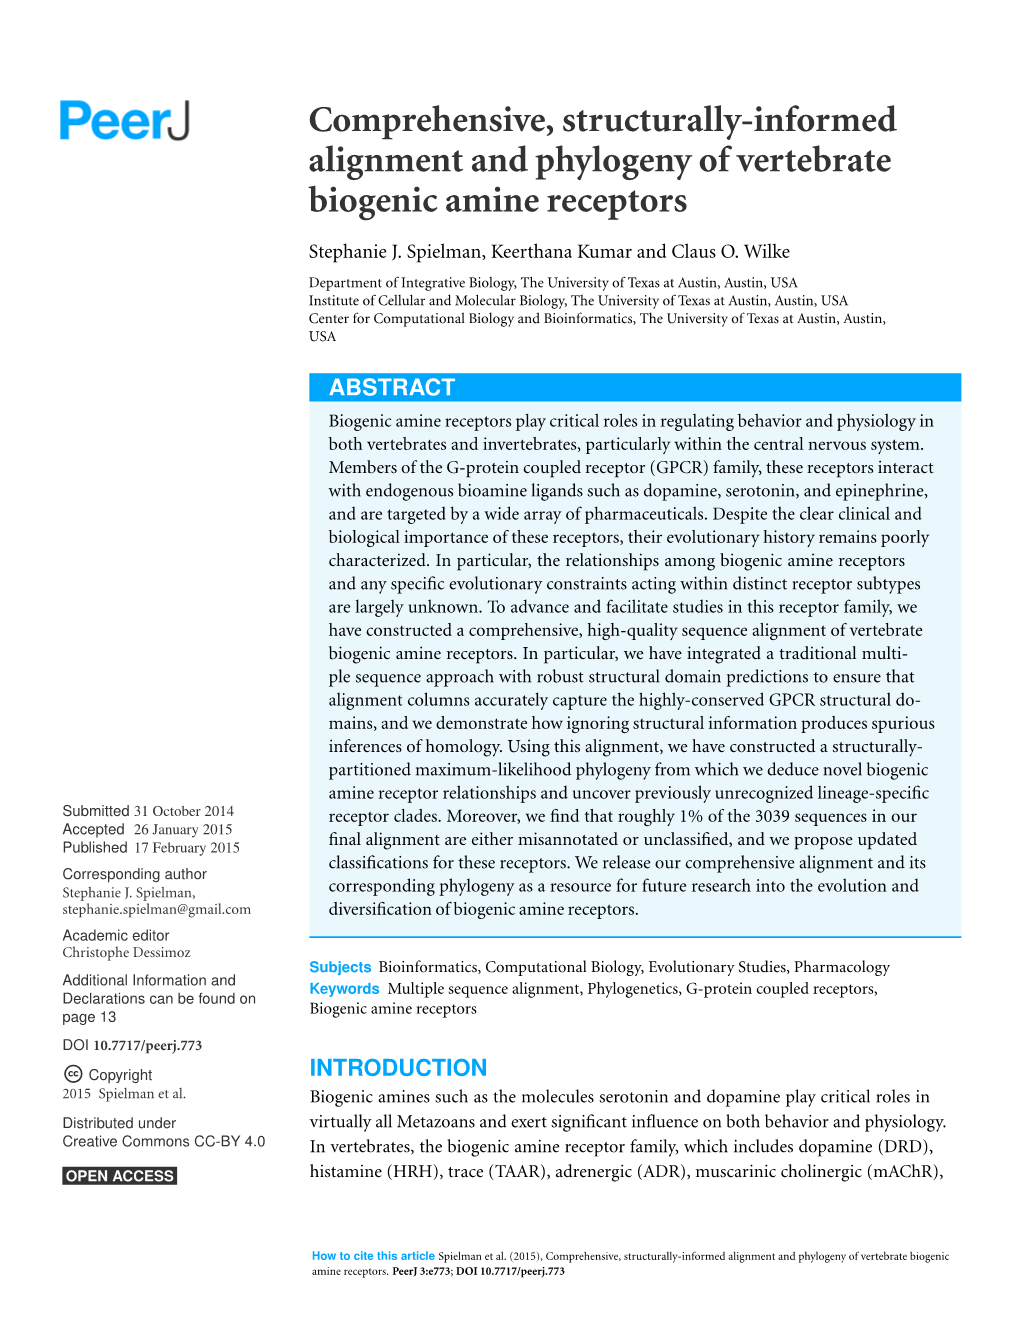 Comprehensive, Structurally-Informed Alignment and Phylogeny of Vertebrate Biogenic Amine Receptors